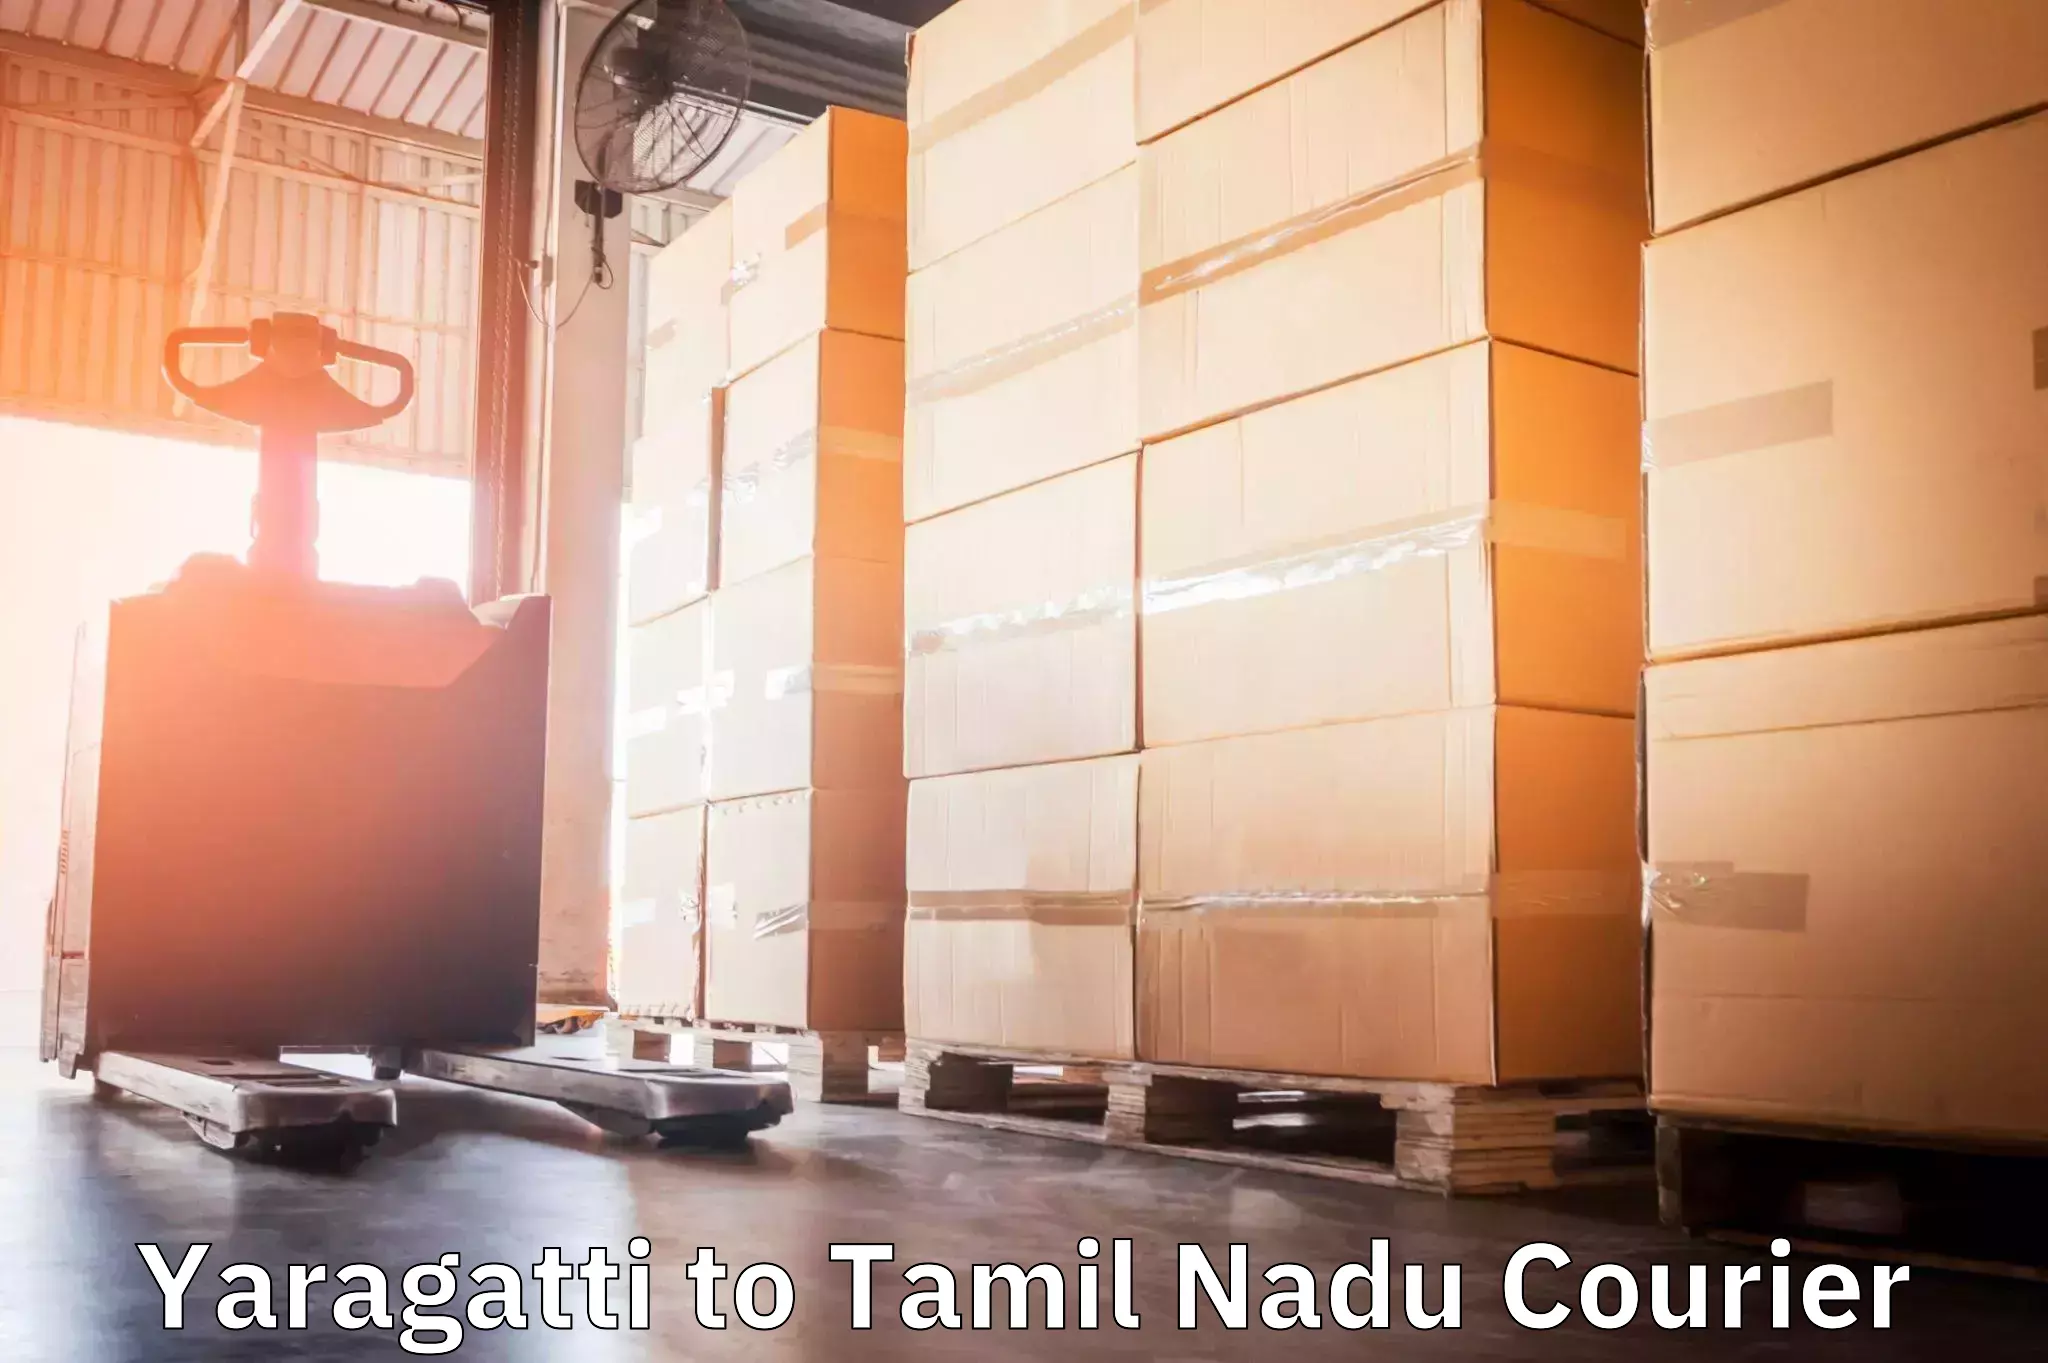 Bulk shipping discounts Yaragatti to Meenakshi Academy of Higher Education and Research Chennai